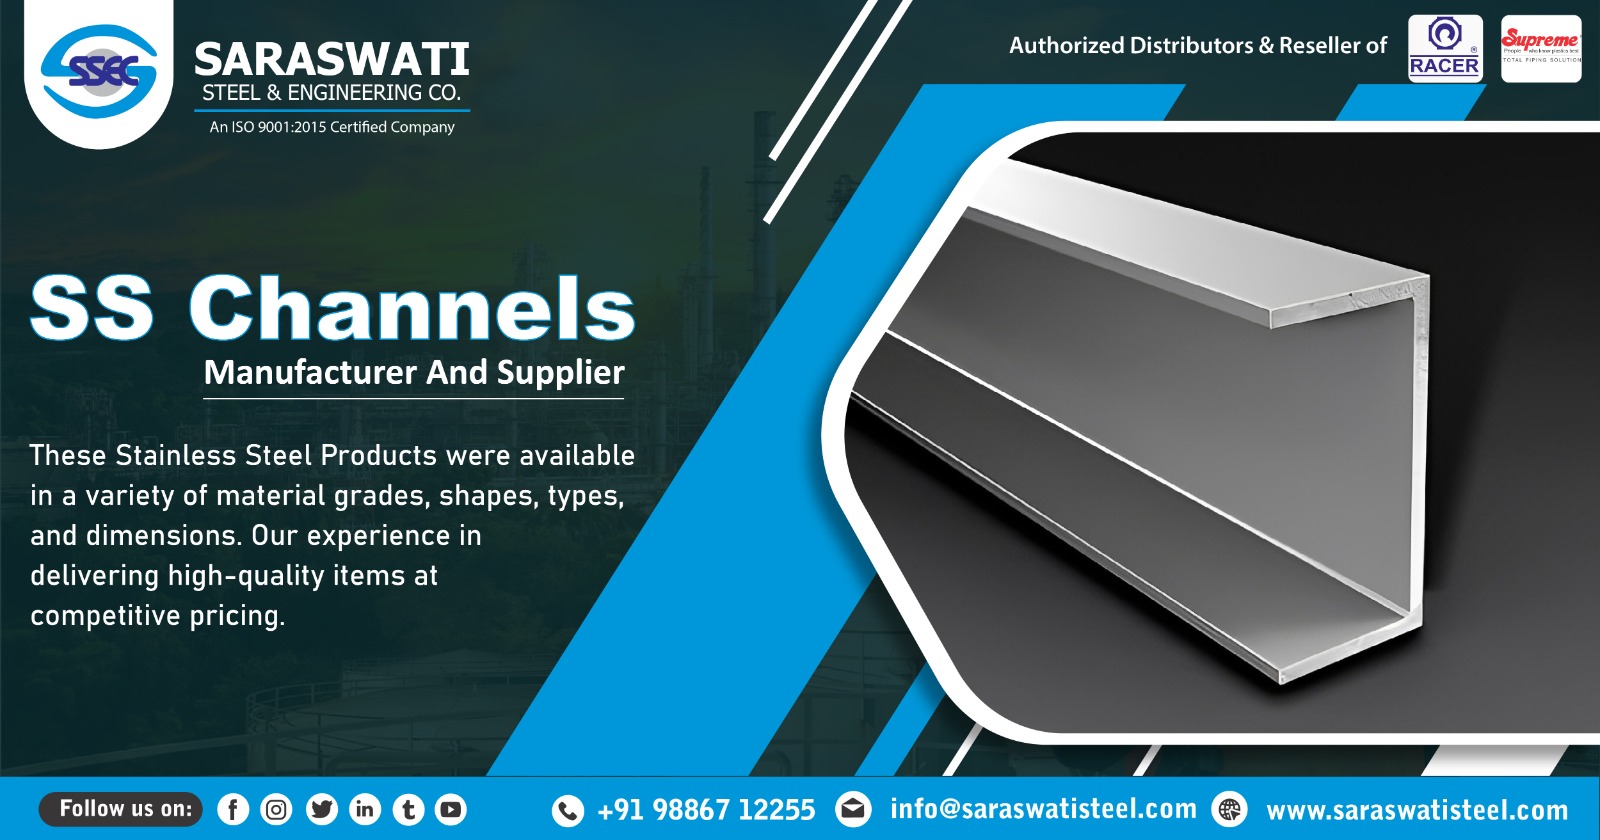 Supplier of Stainless Steel Channels in Chennai